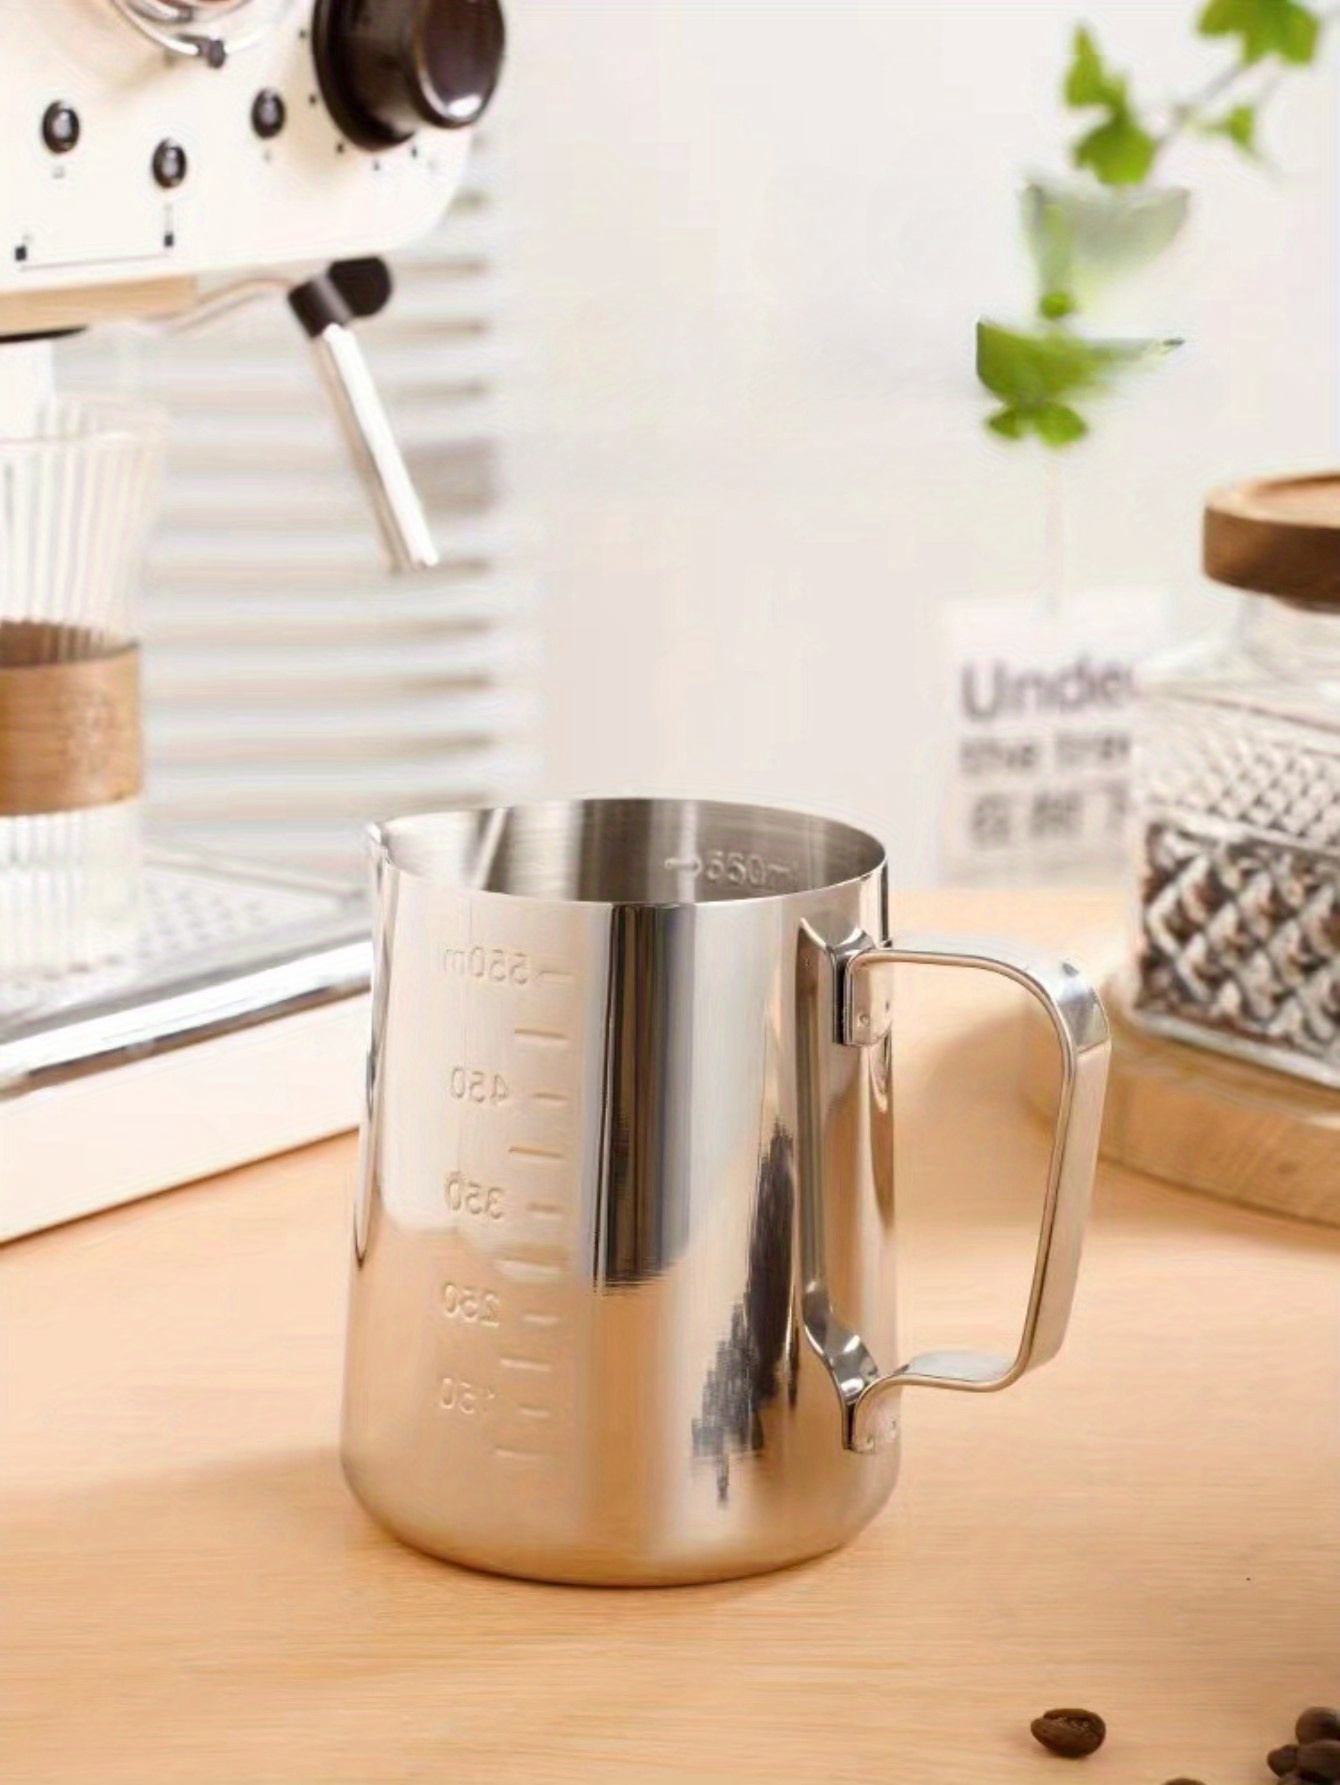 Stainless Steel Froth Pitcher Milk Frother Latte Art Creamer Cup Kitch